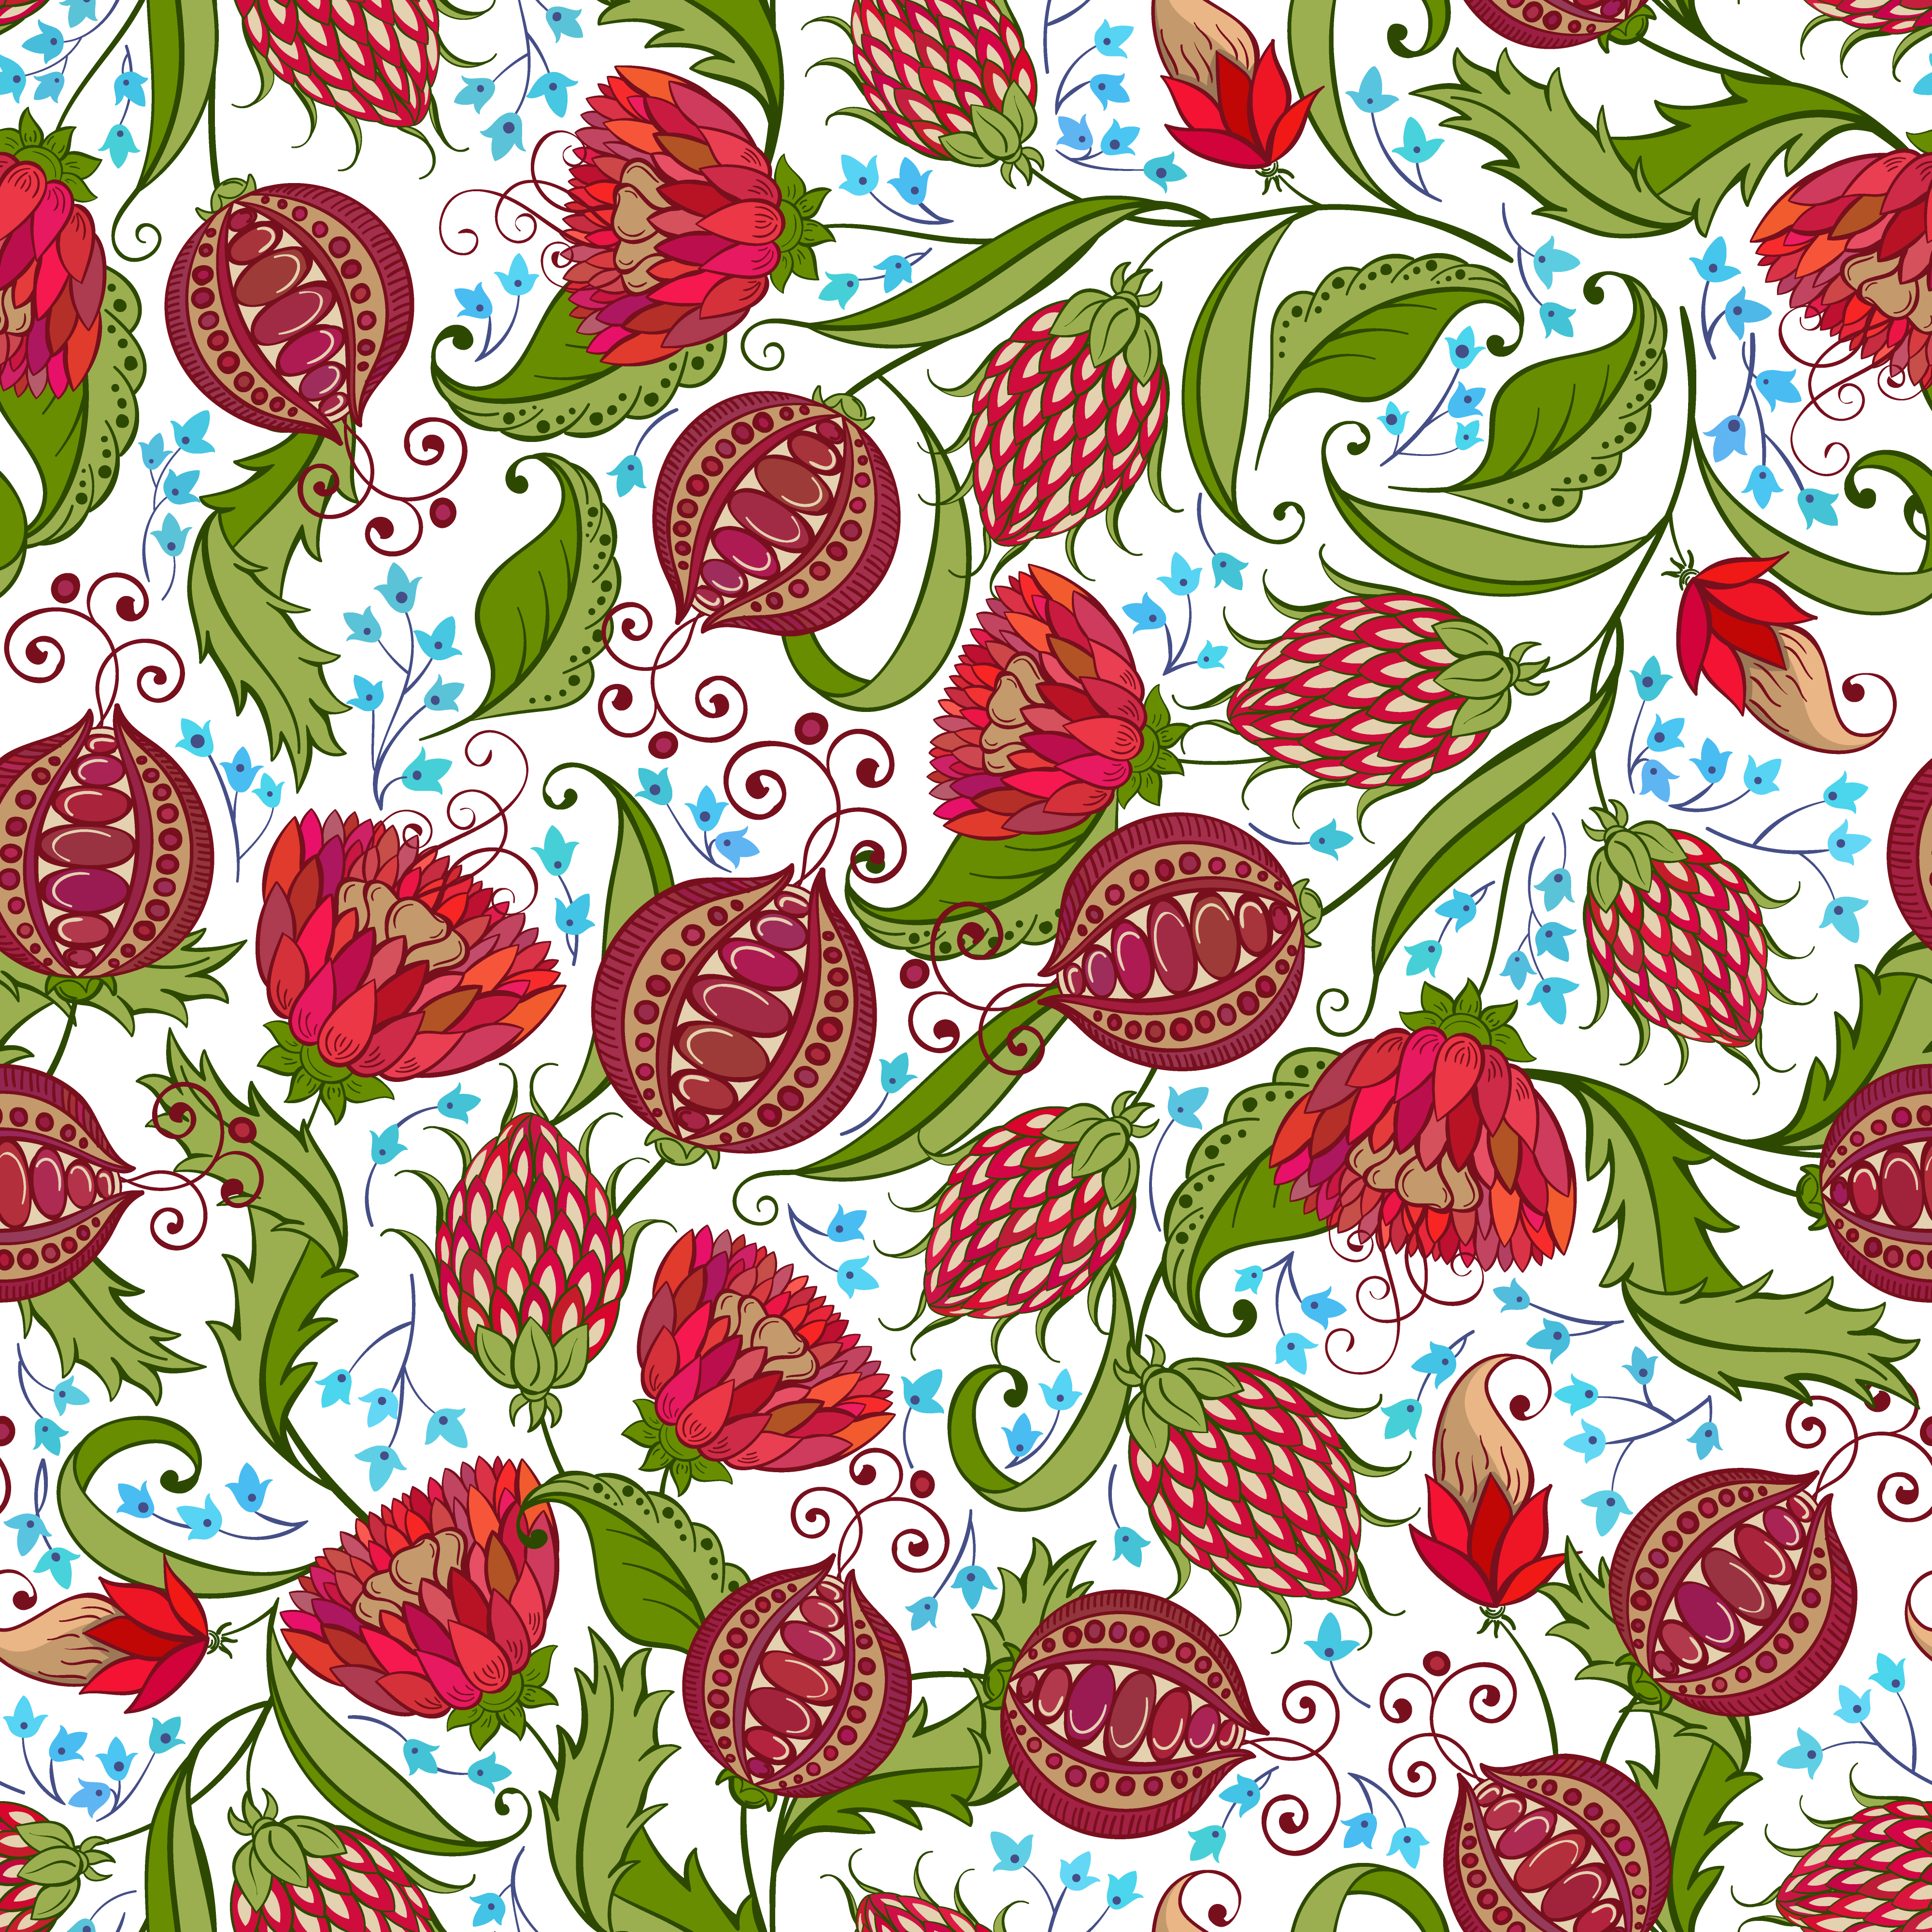 Pomegranate Seamless Pattern 1272286 Download Free Vectors Clipart